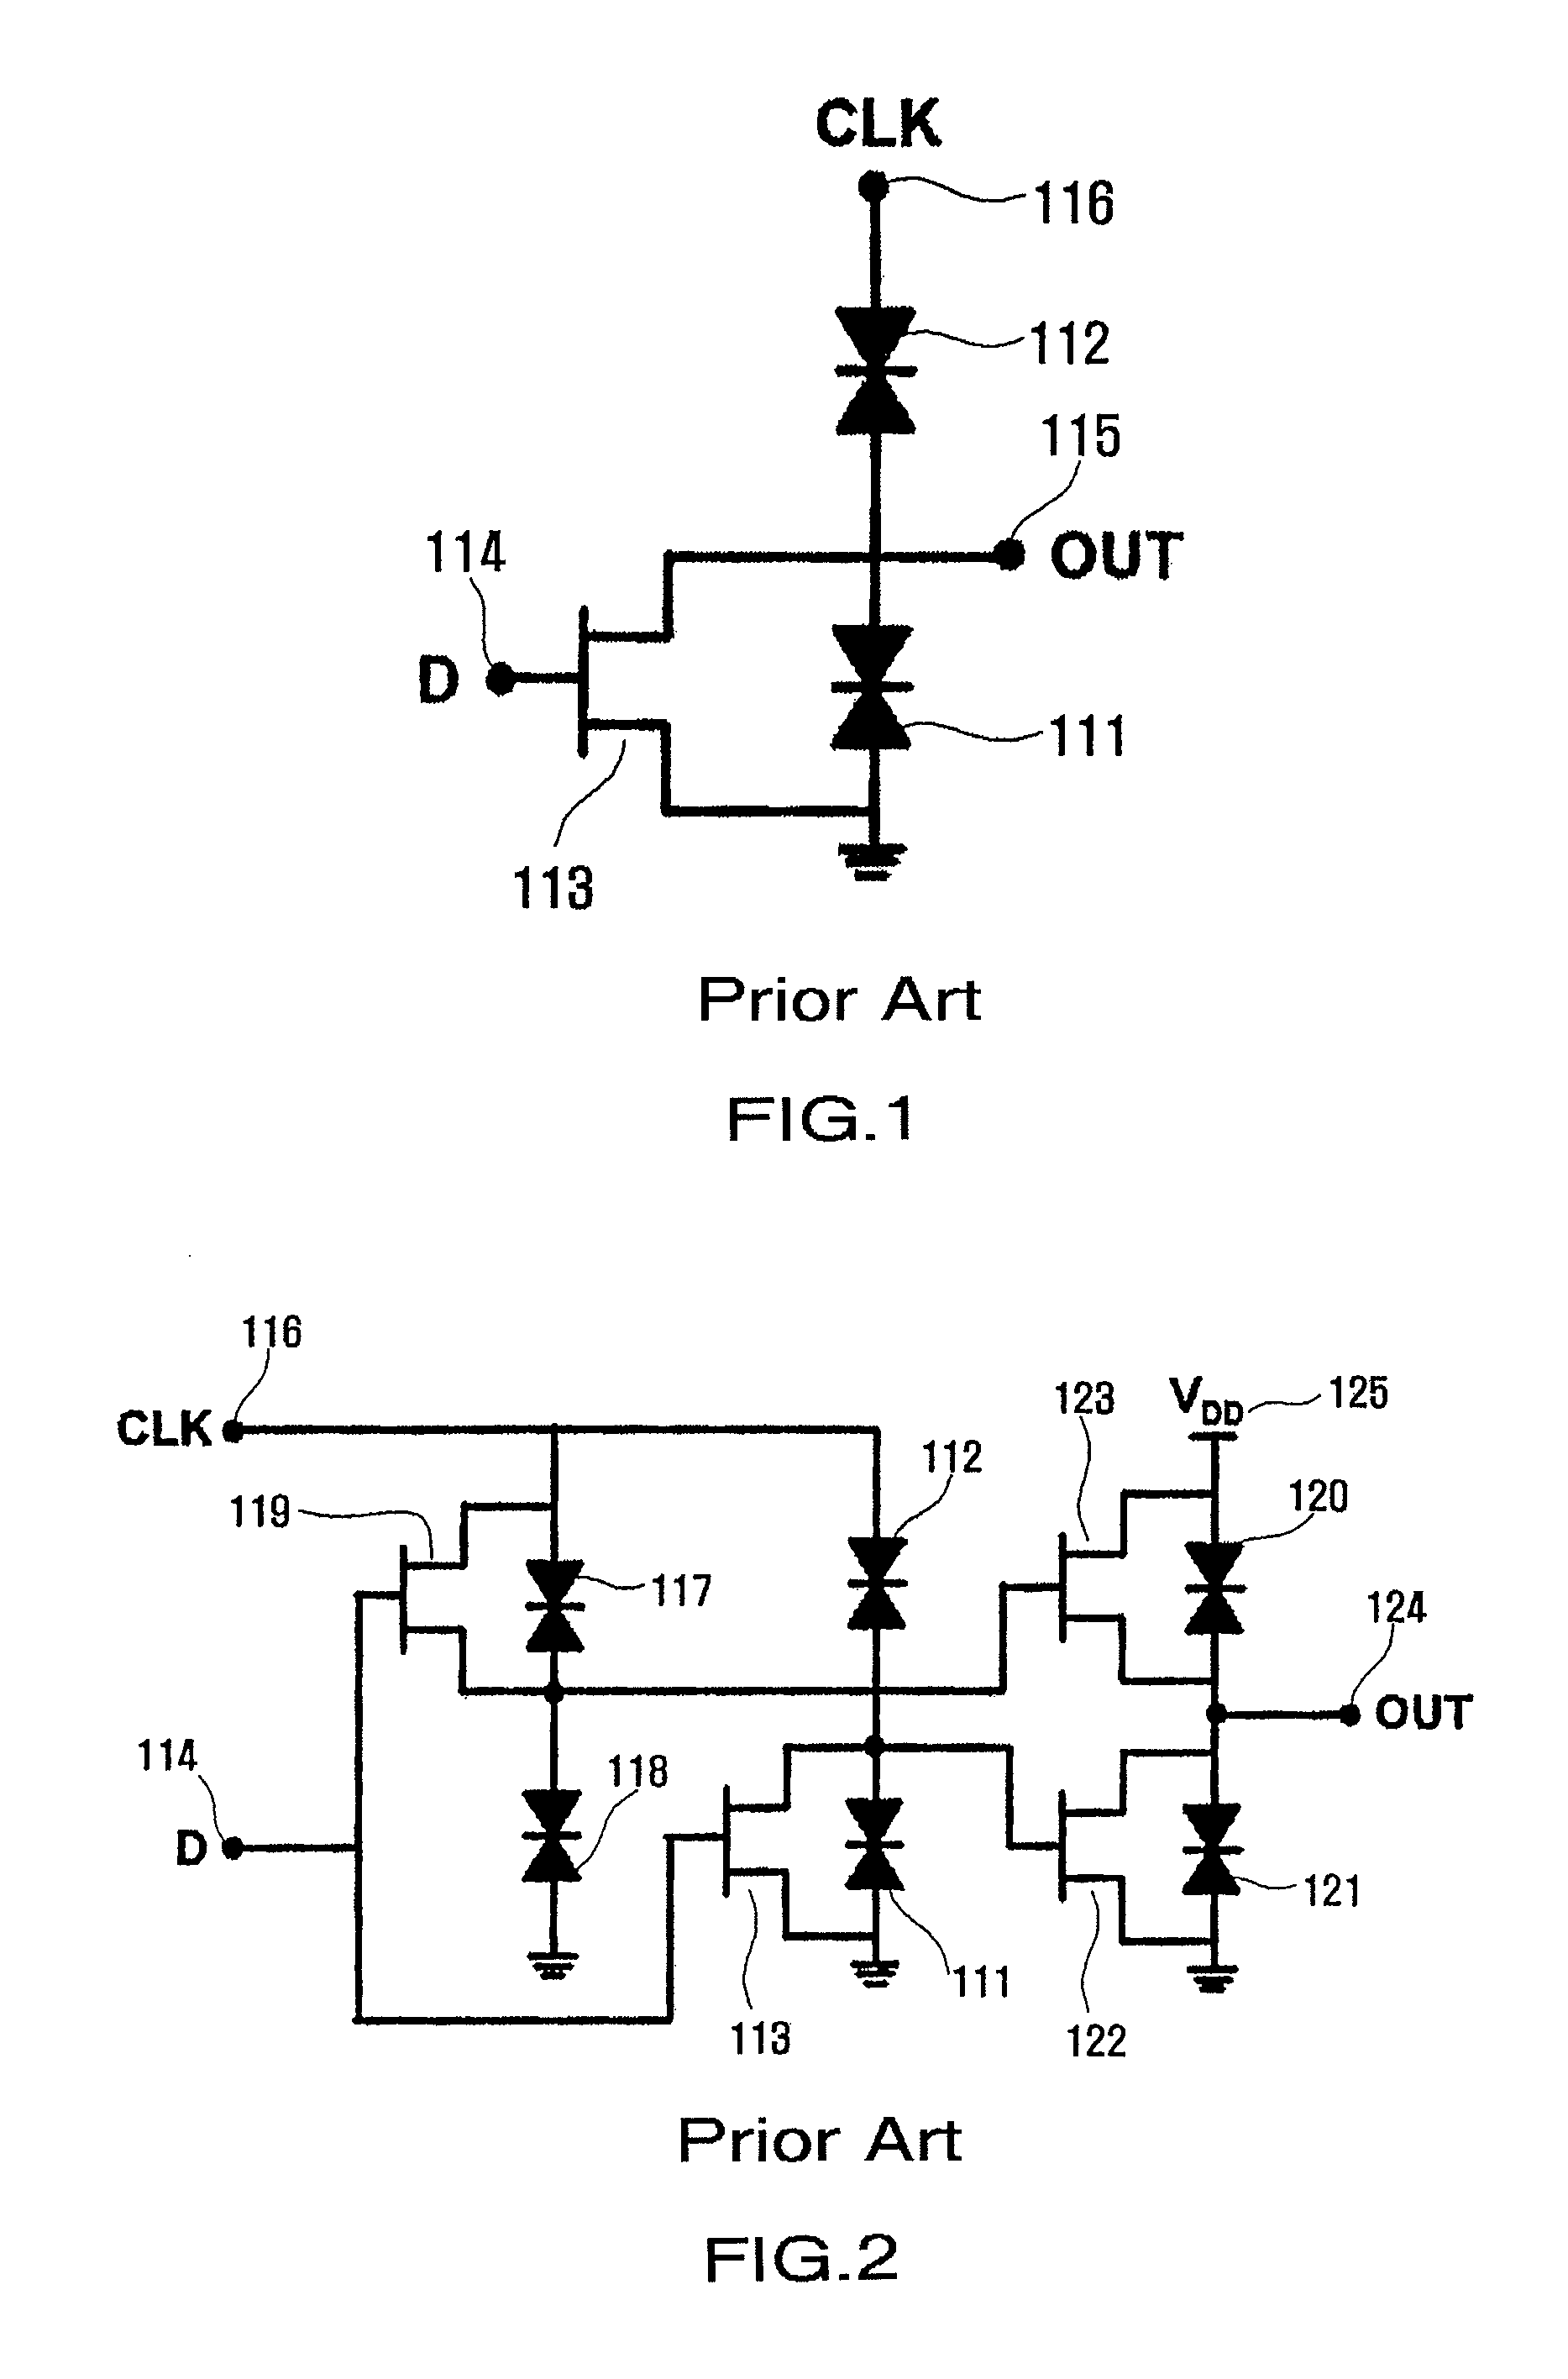 SET/RESET latch circuit, Schmitt trigger circuit, and MOBILE based D-type flip flop circuit and frequency divider circuit thereof